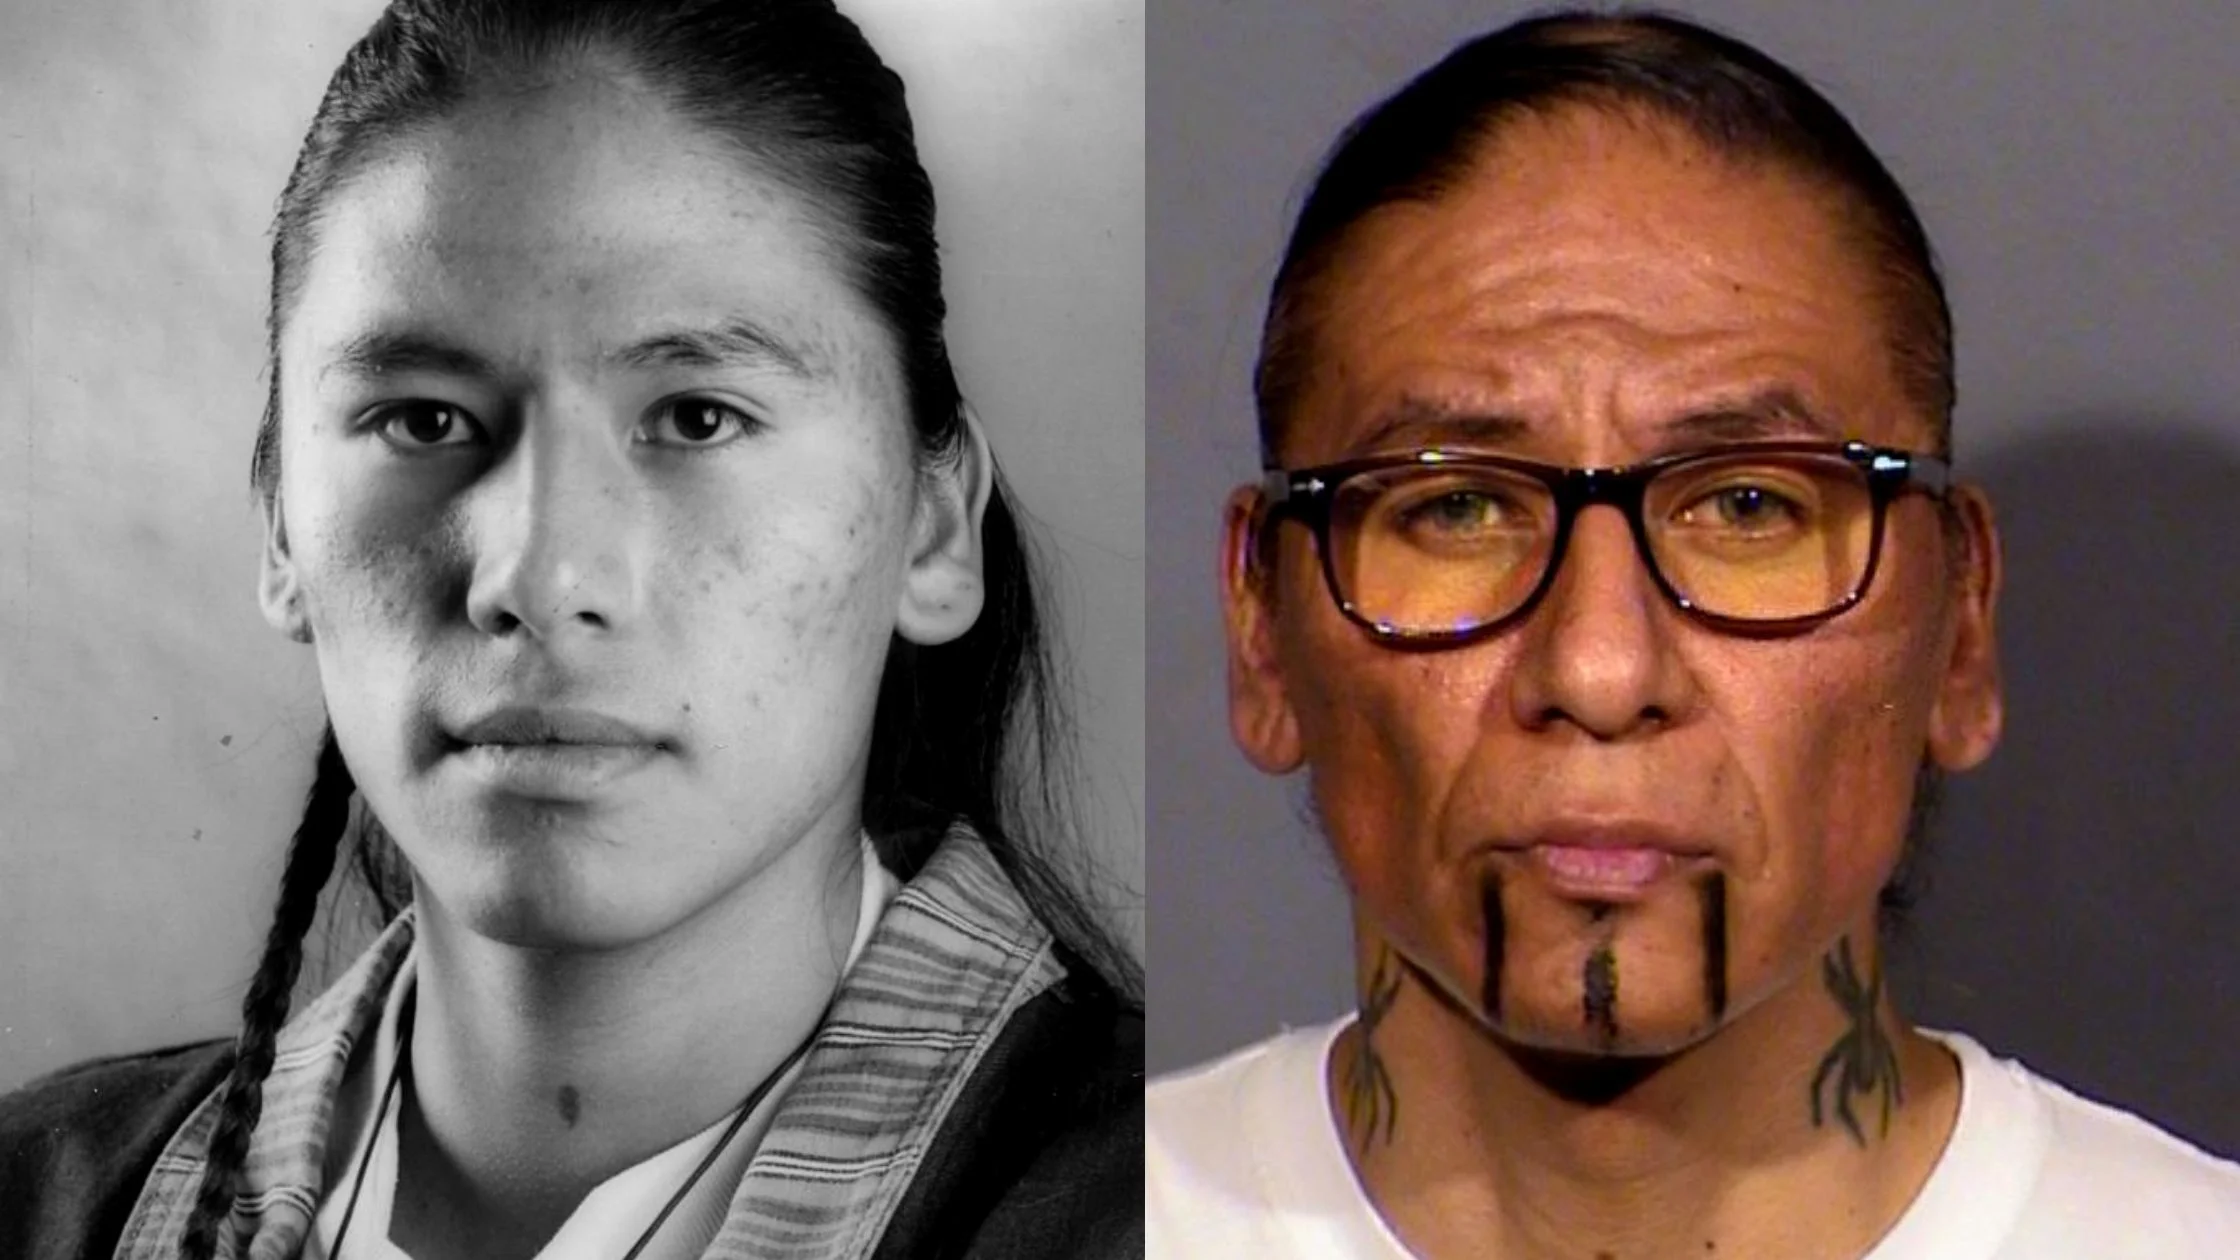 Nathan Chasing Horse Arrested Dances With Wolves Actor Detained For The Sexual Assaults